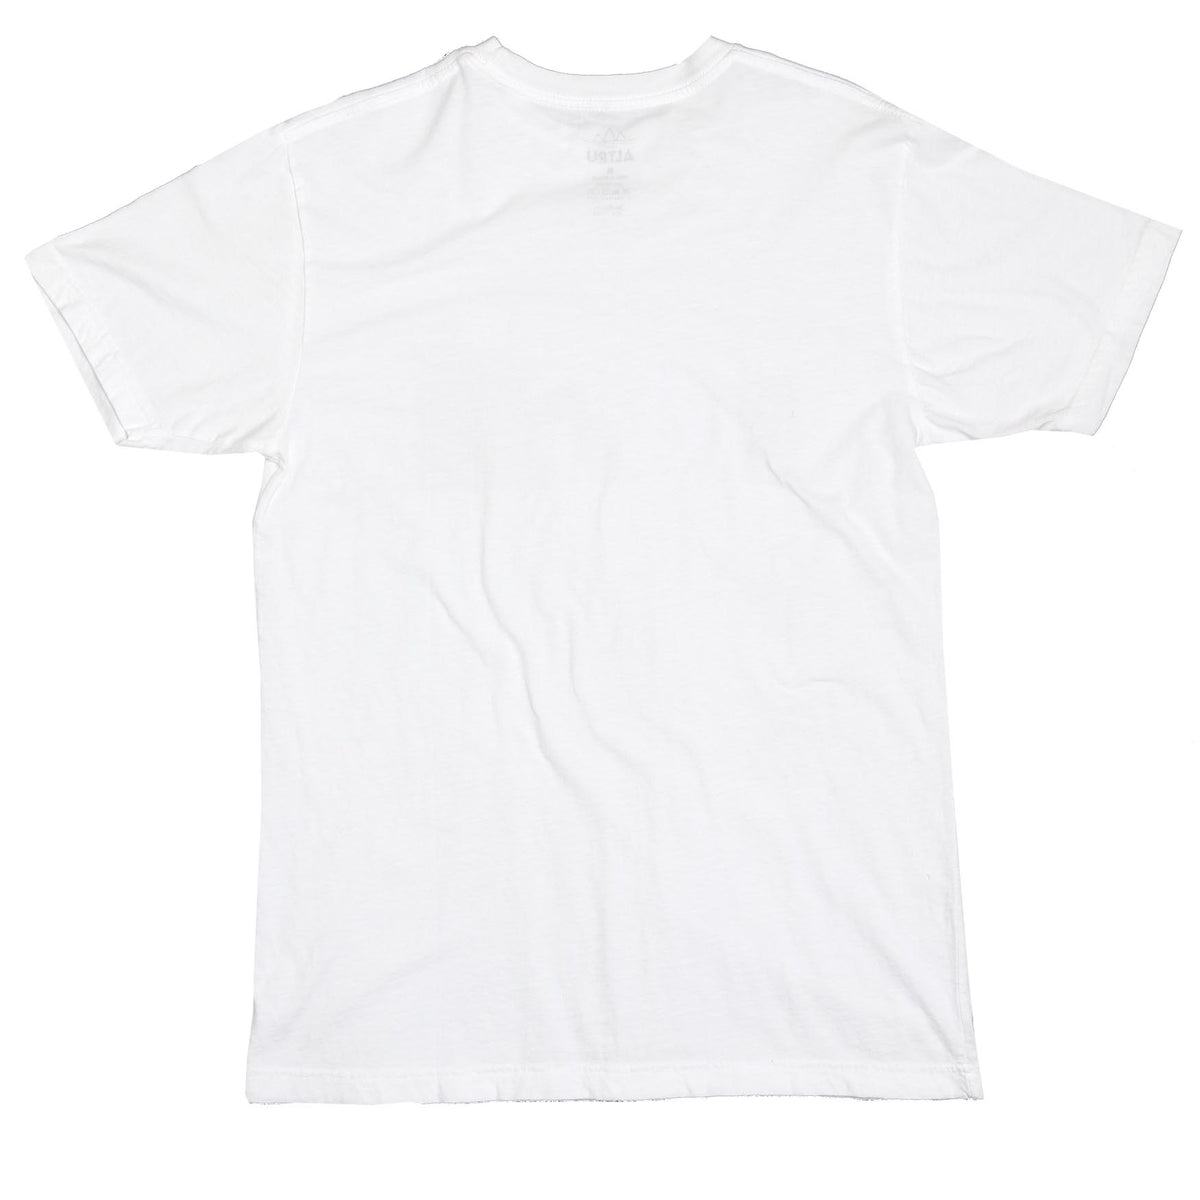 Buy Maxell Blown Away Guy graphic white t-shirt by Altru Apparel ...